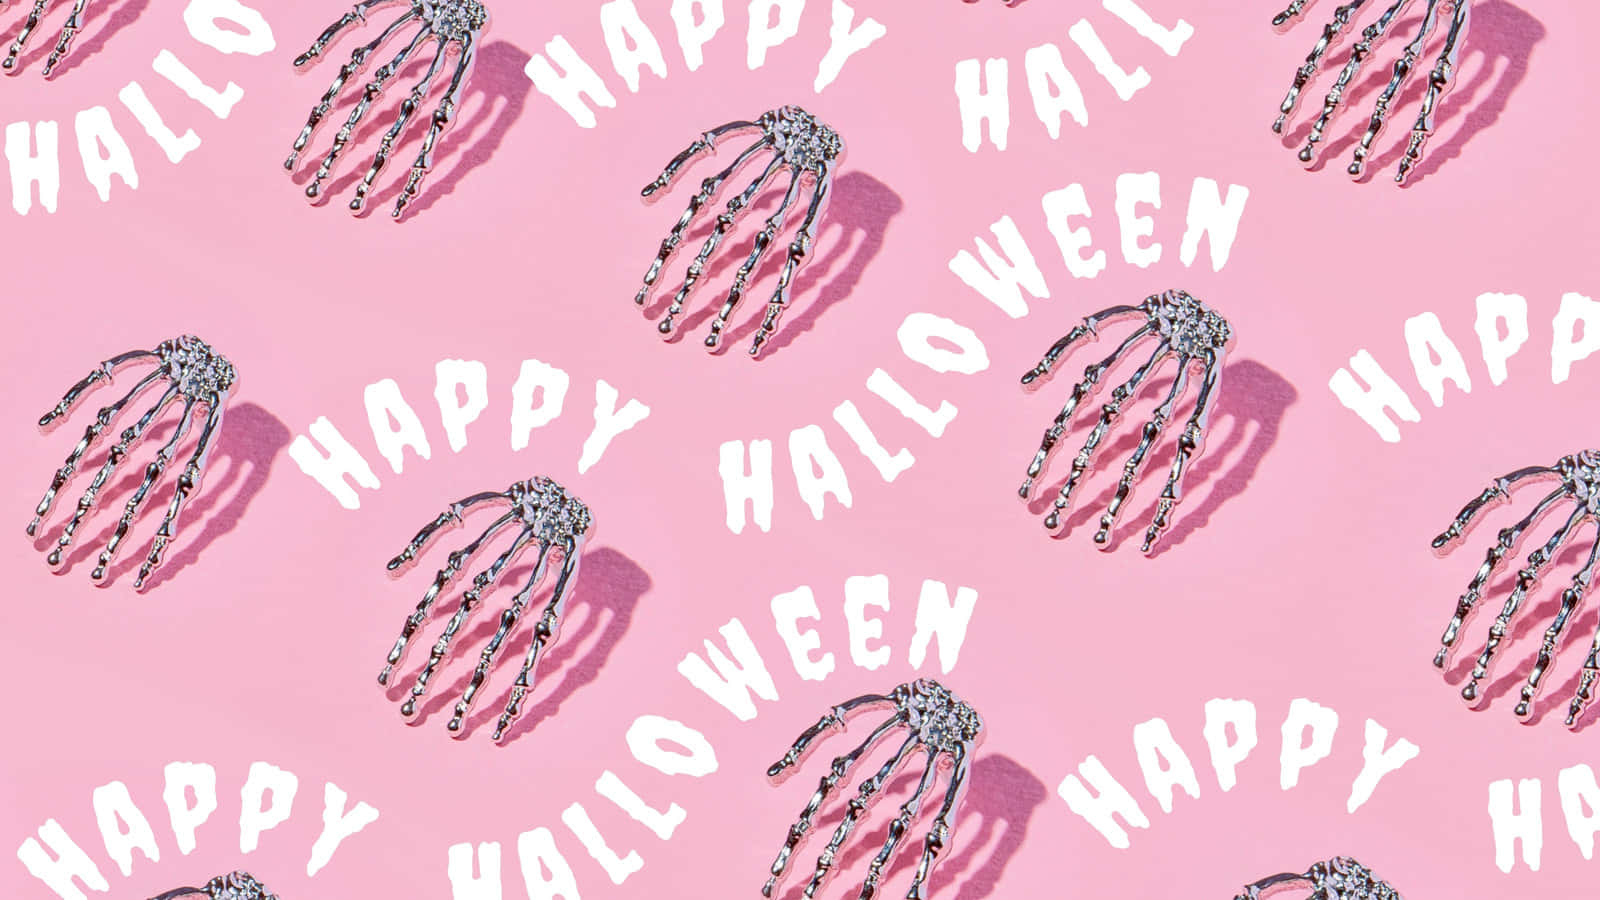 Make this Halloween super spooky with a pop of pink!